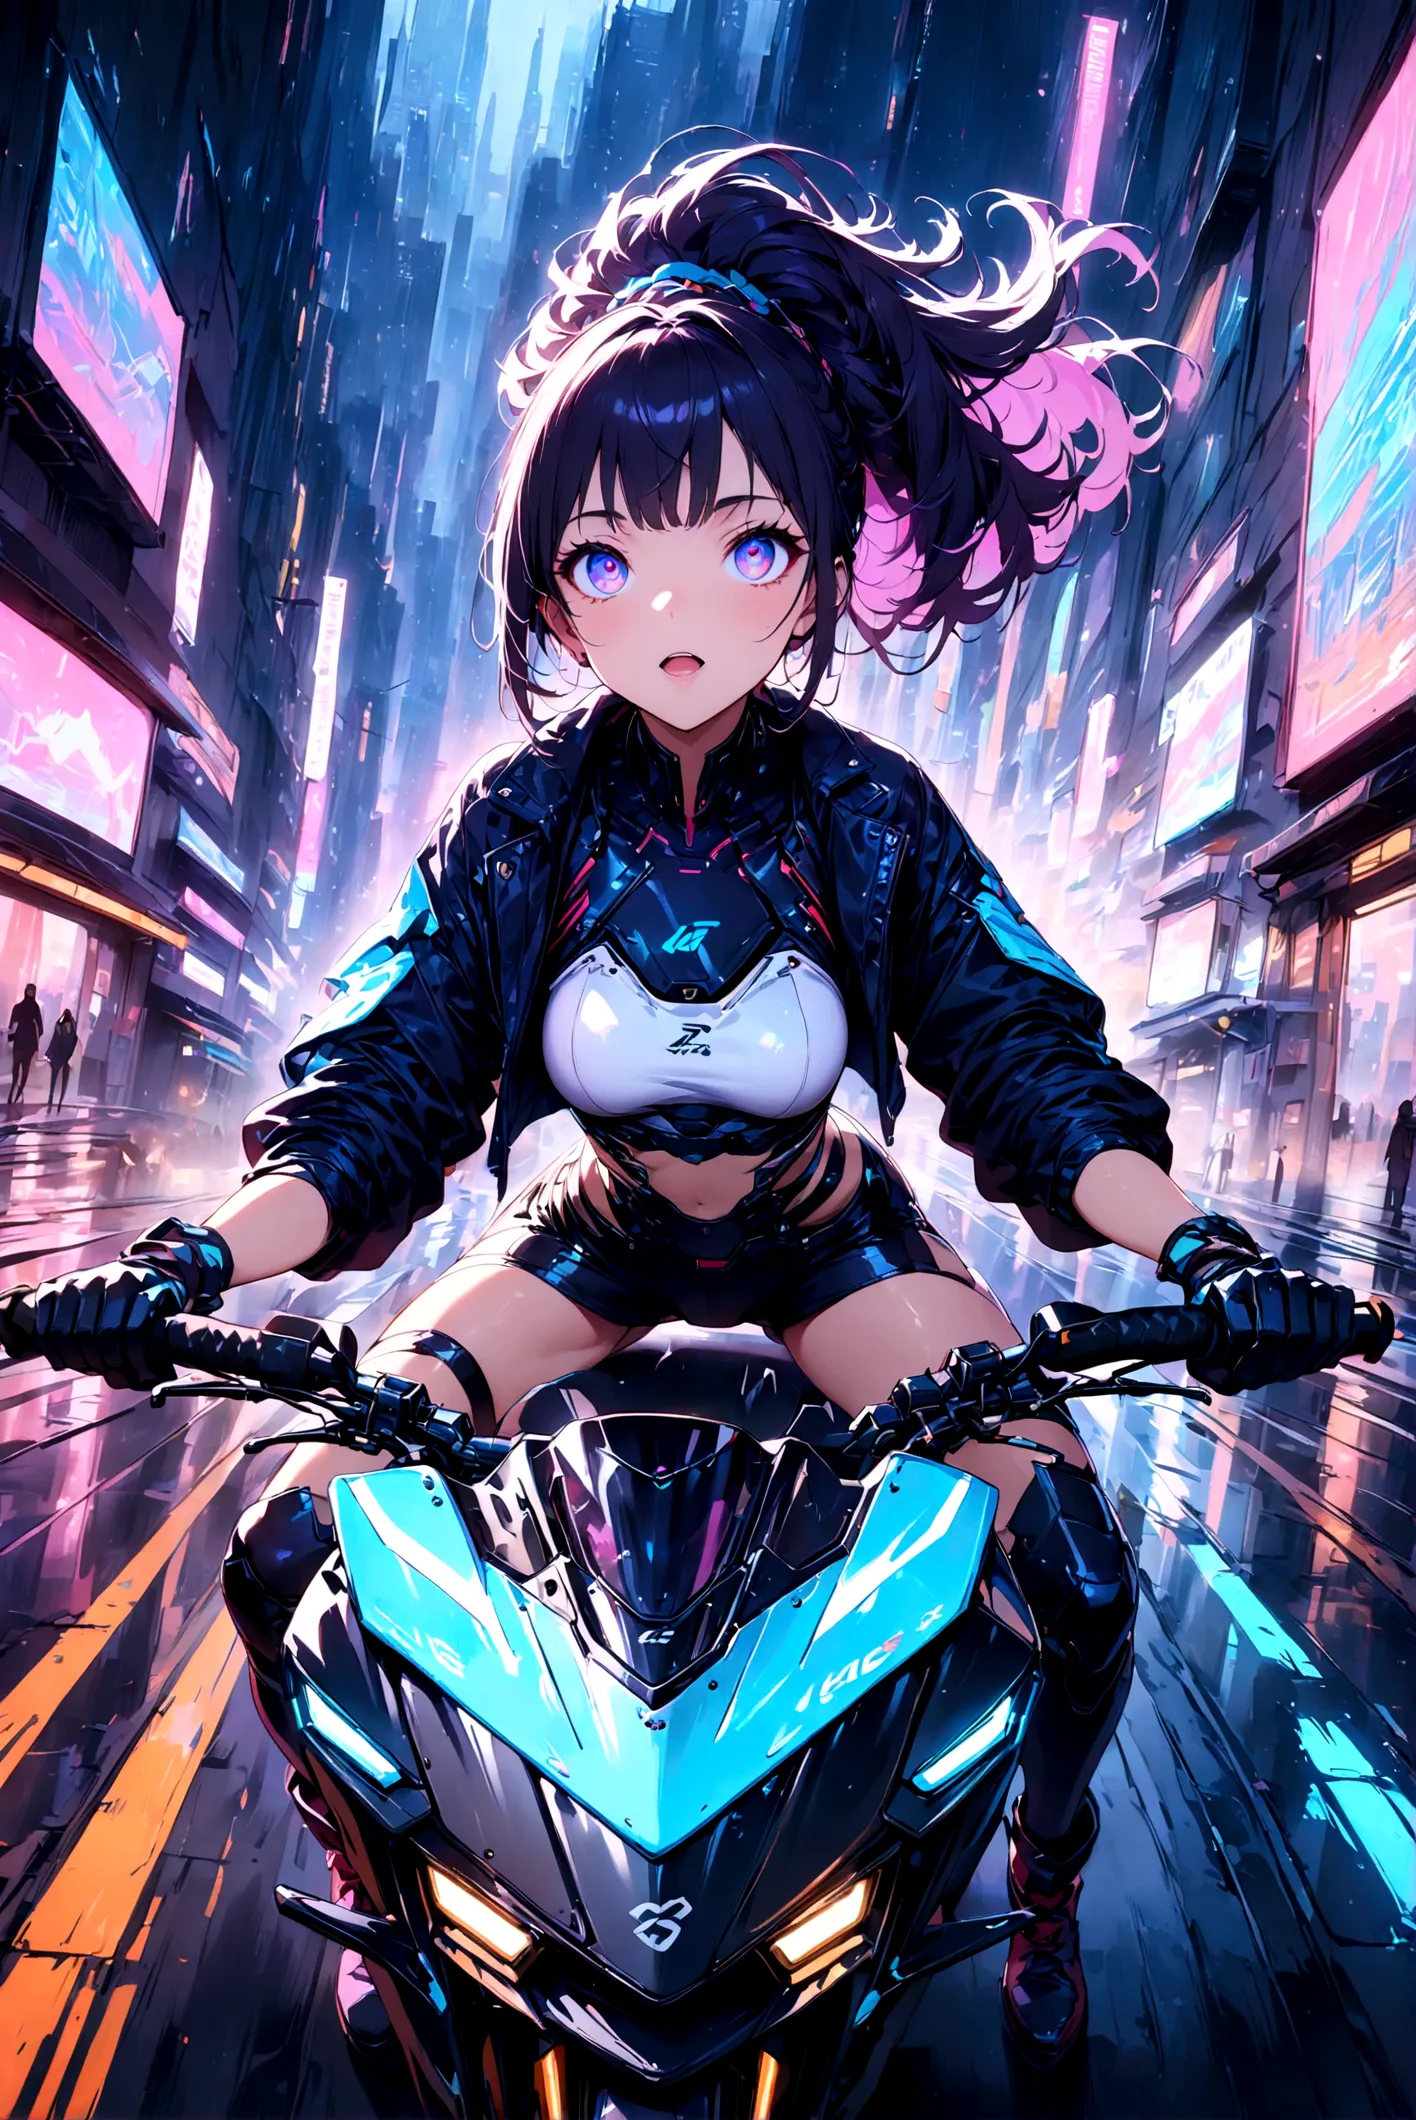 (((Looking up)))，1 girl，(((Driving a large motorcycle through the city)))，laughing out loud， - Futuristic cityscape，Late Night，C...